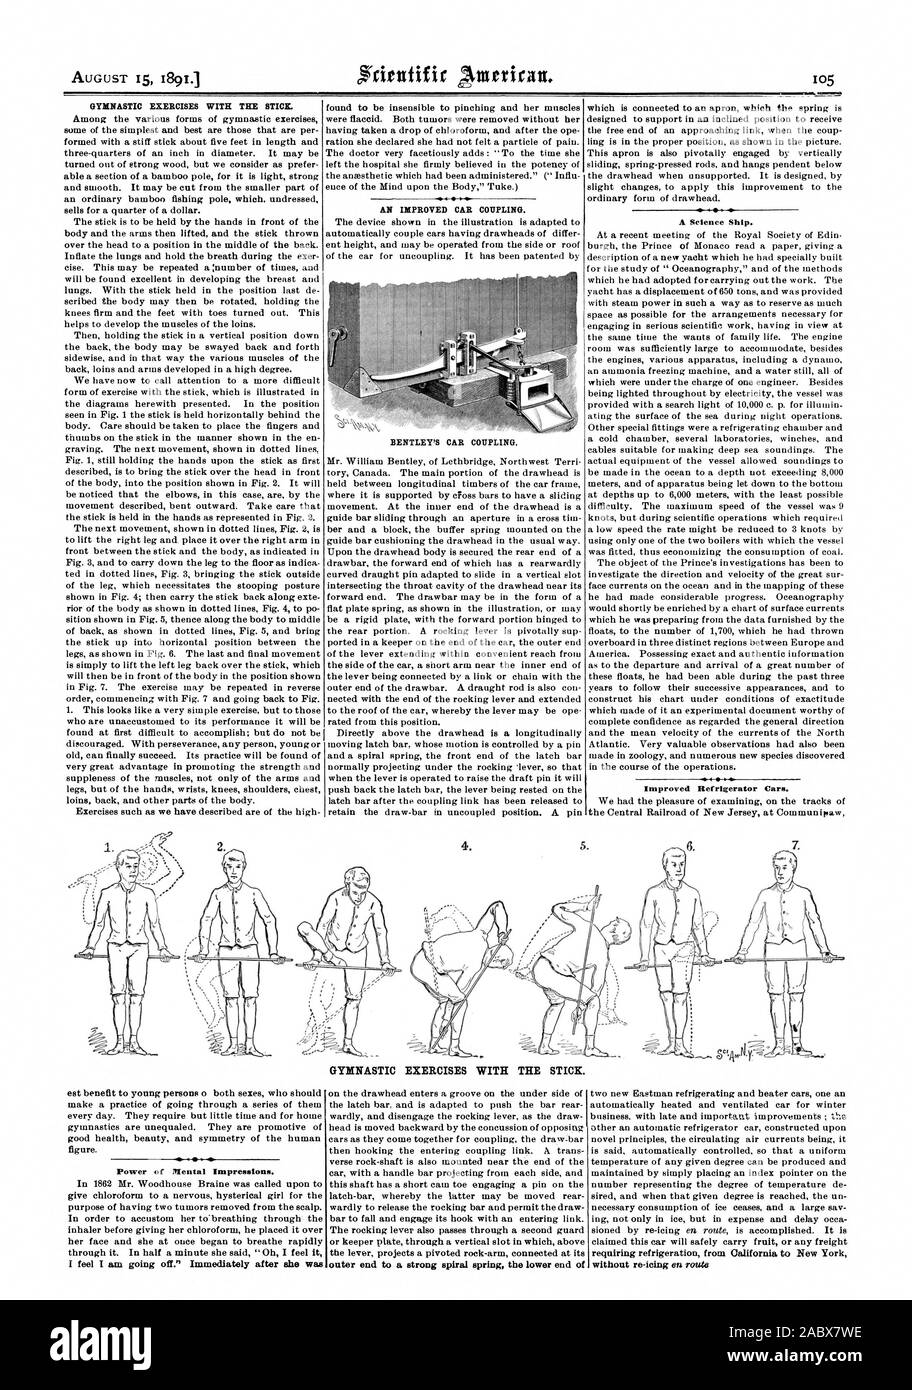 GYMNASTIC EXERCISES WITH THE STICK. AN IMPROVED CAR COUPLING. BENTLEY'S CAR COUPLING. A Science Ship. Improved Refrigerator Cars. GYMNASTIC EXERCISES WITH THE STICK. Power of Mental Impressions. outer end to a strong spiral spring the lower end of, scientific american, 1891-08-15 Stock Photo